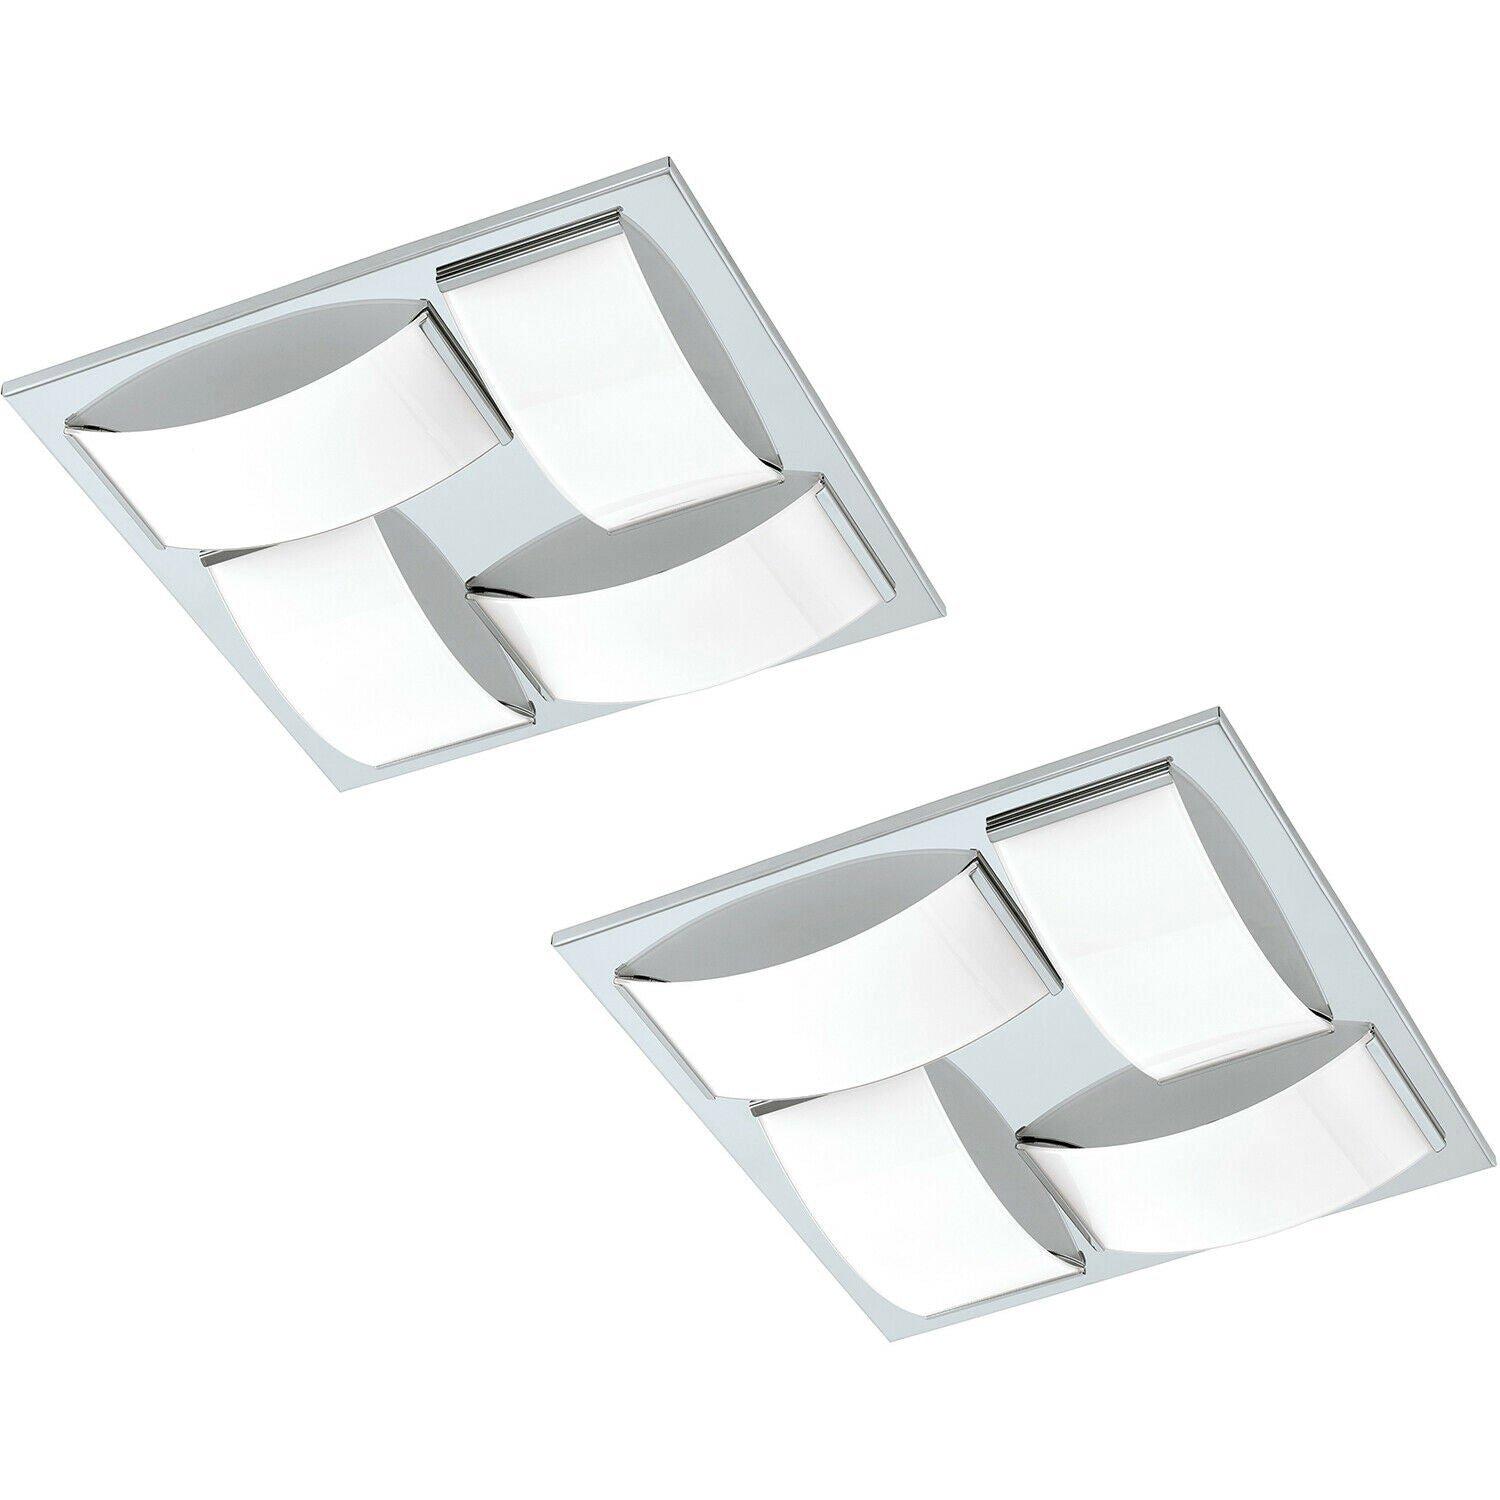 2 PACK Wall Flush Ceiling Light Colour Chrome Shade White Glass Painted 4x LED